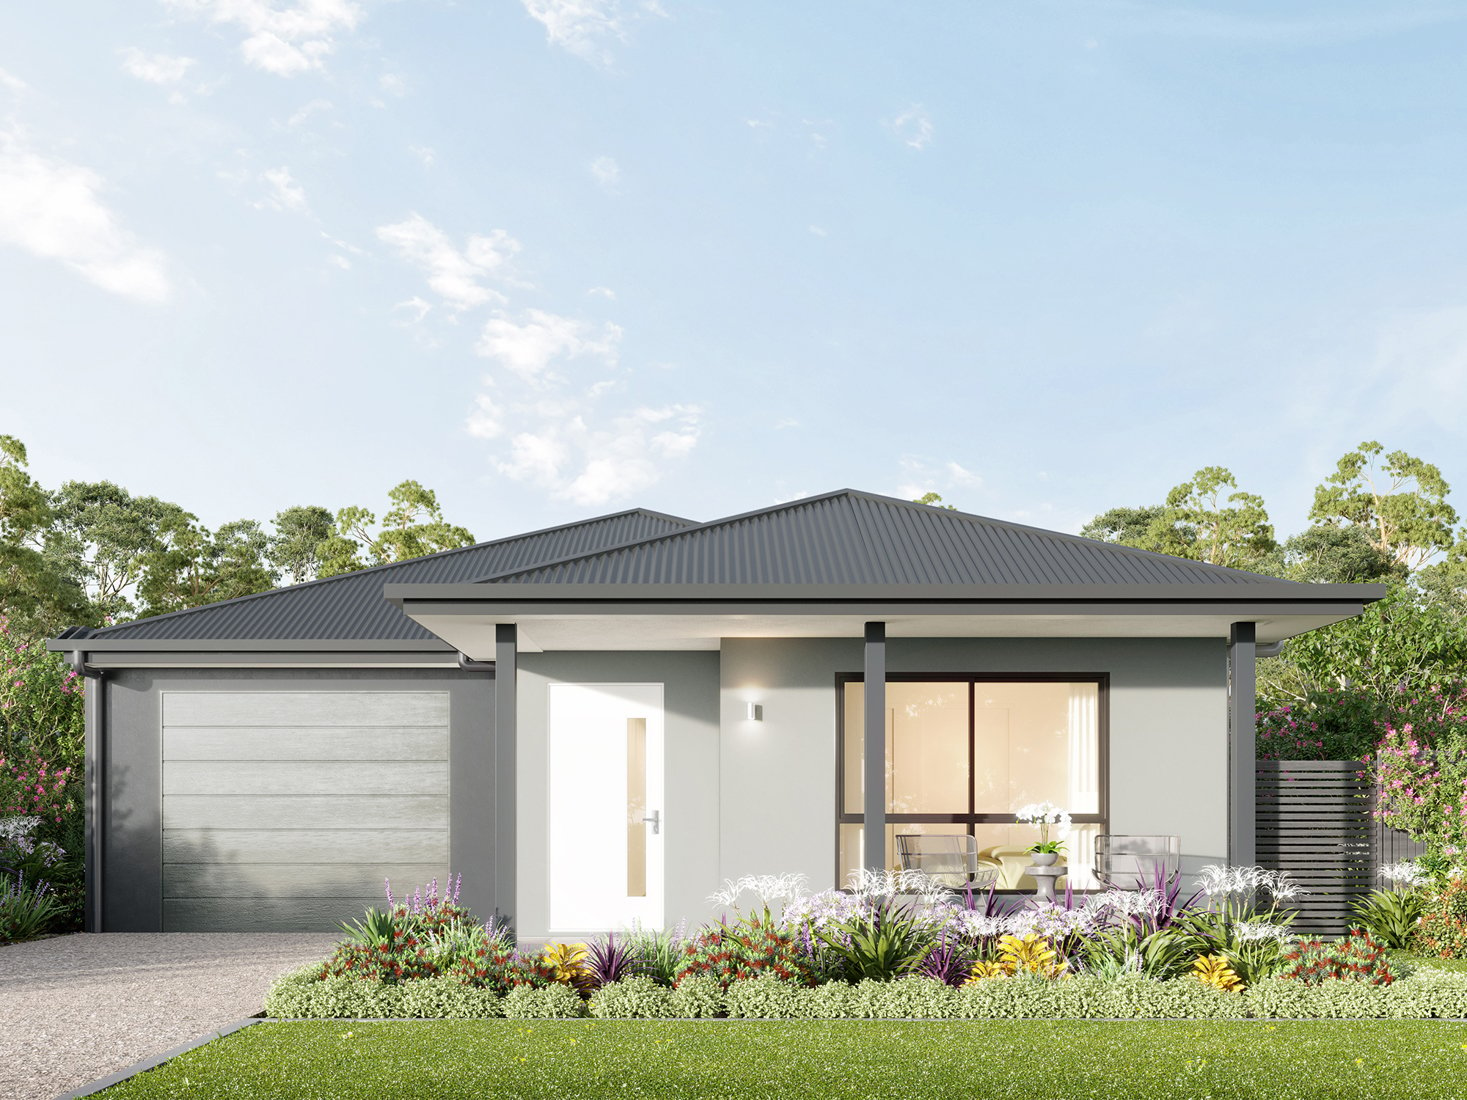 Render of the Allora house design with a Hip facade located at Stockland Halcyon Rise.